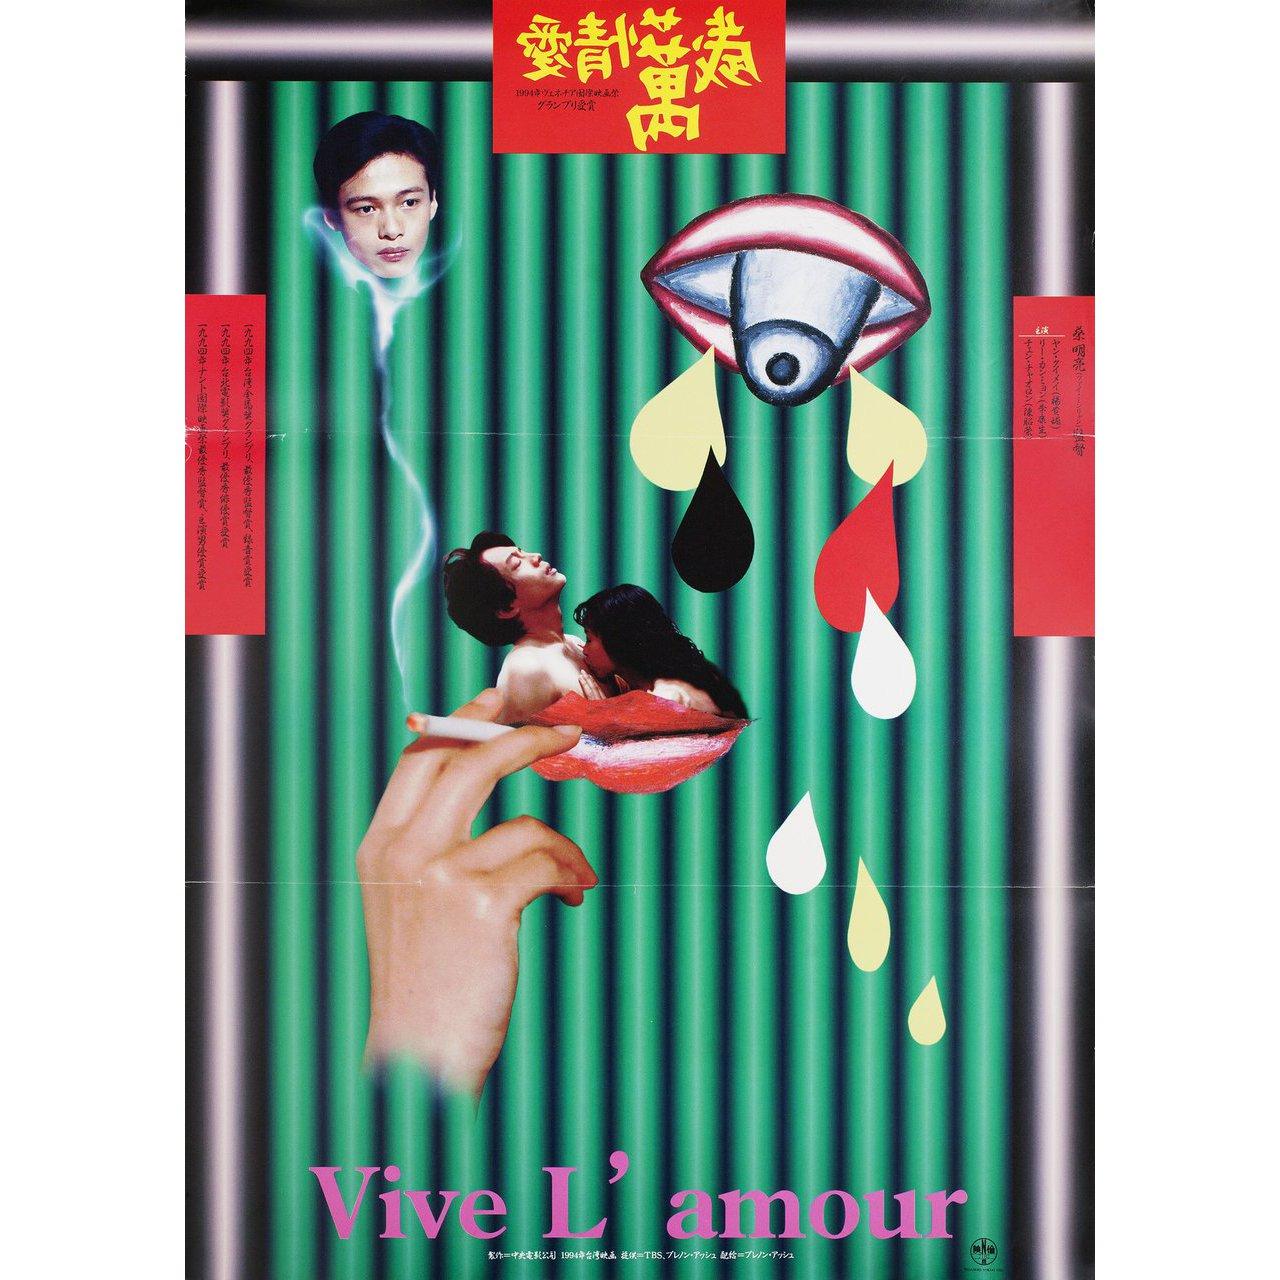 Original 1995 Japanese B2 poster by Tadanori Yokoo for the film Vive L'Amour (Ai Qing Wan Sui) directed by Ming-liang Tsai with Chao-jung Chen / Kang-sheng Lee / Kuei-Mei Yang. Very good-fine condition, tri-fold. Many original posters were issued